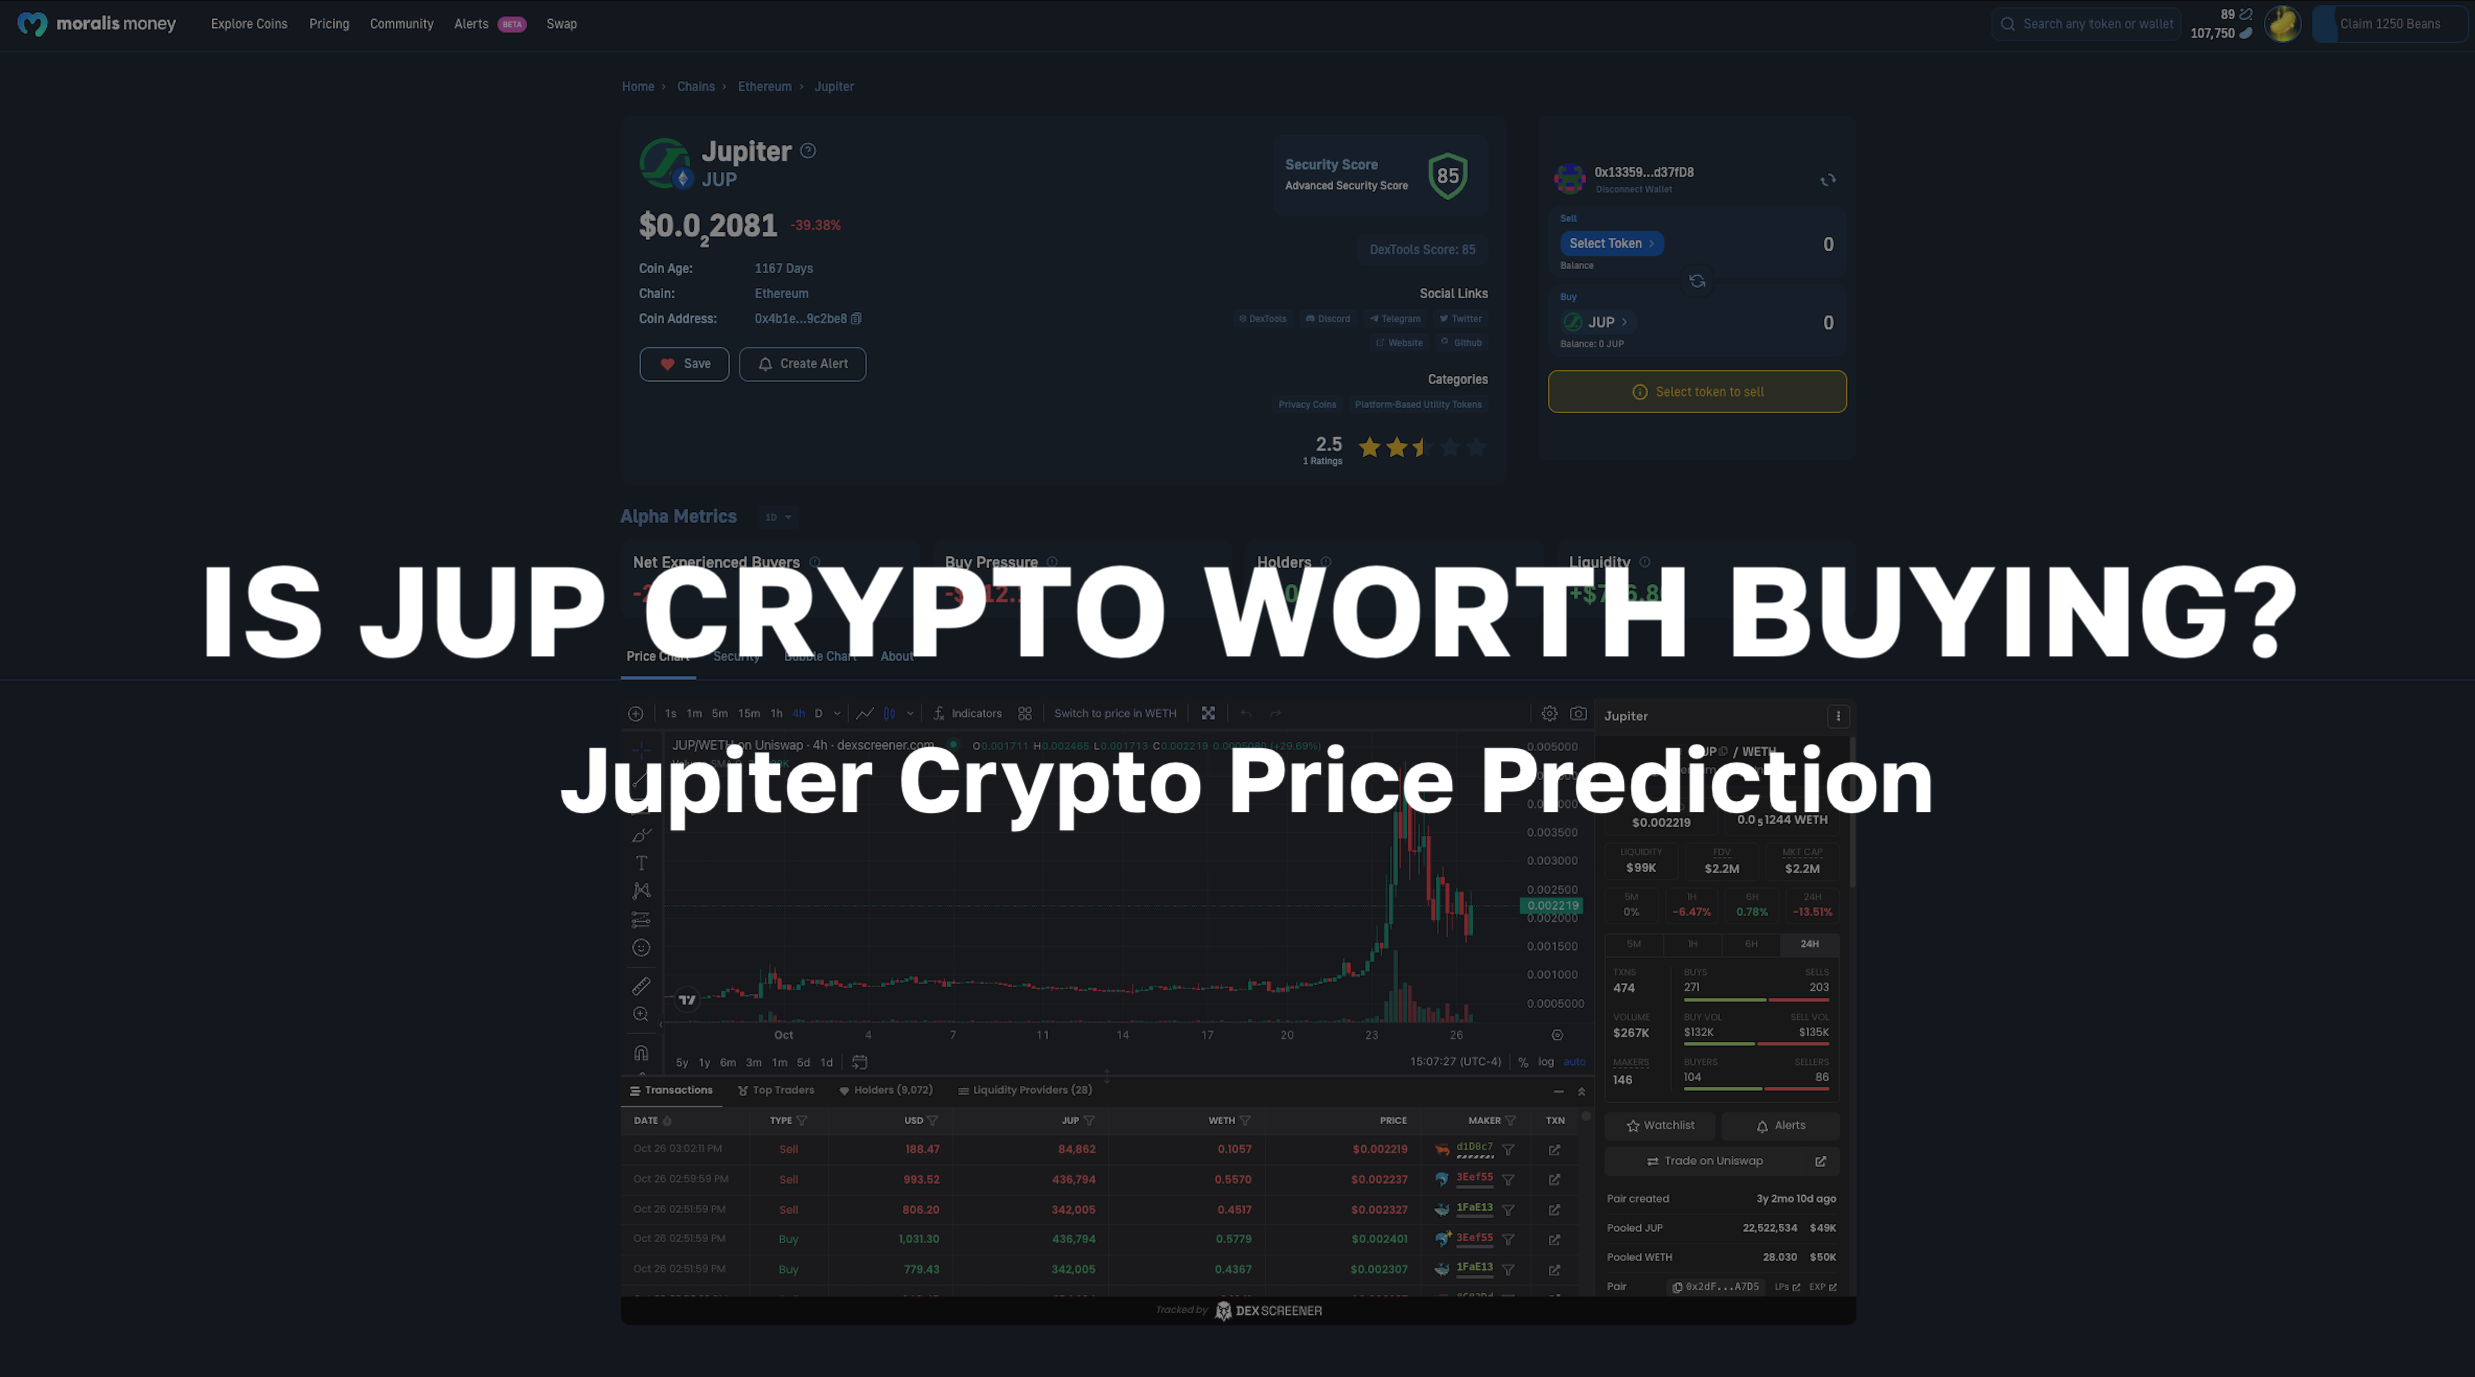 Jupiter Crypto Price Prediction - Is JUP Crypto Worth Buying?